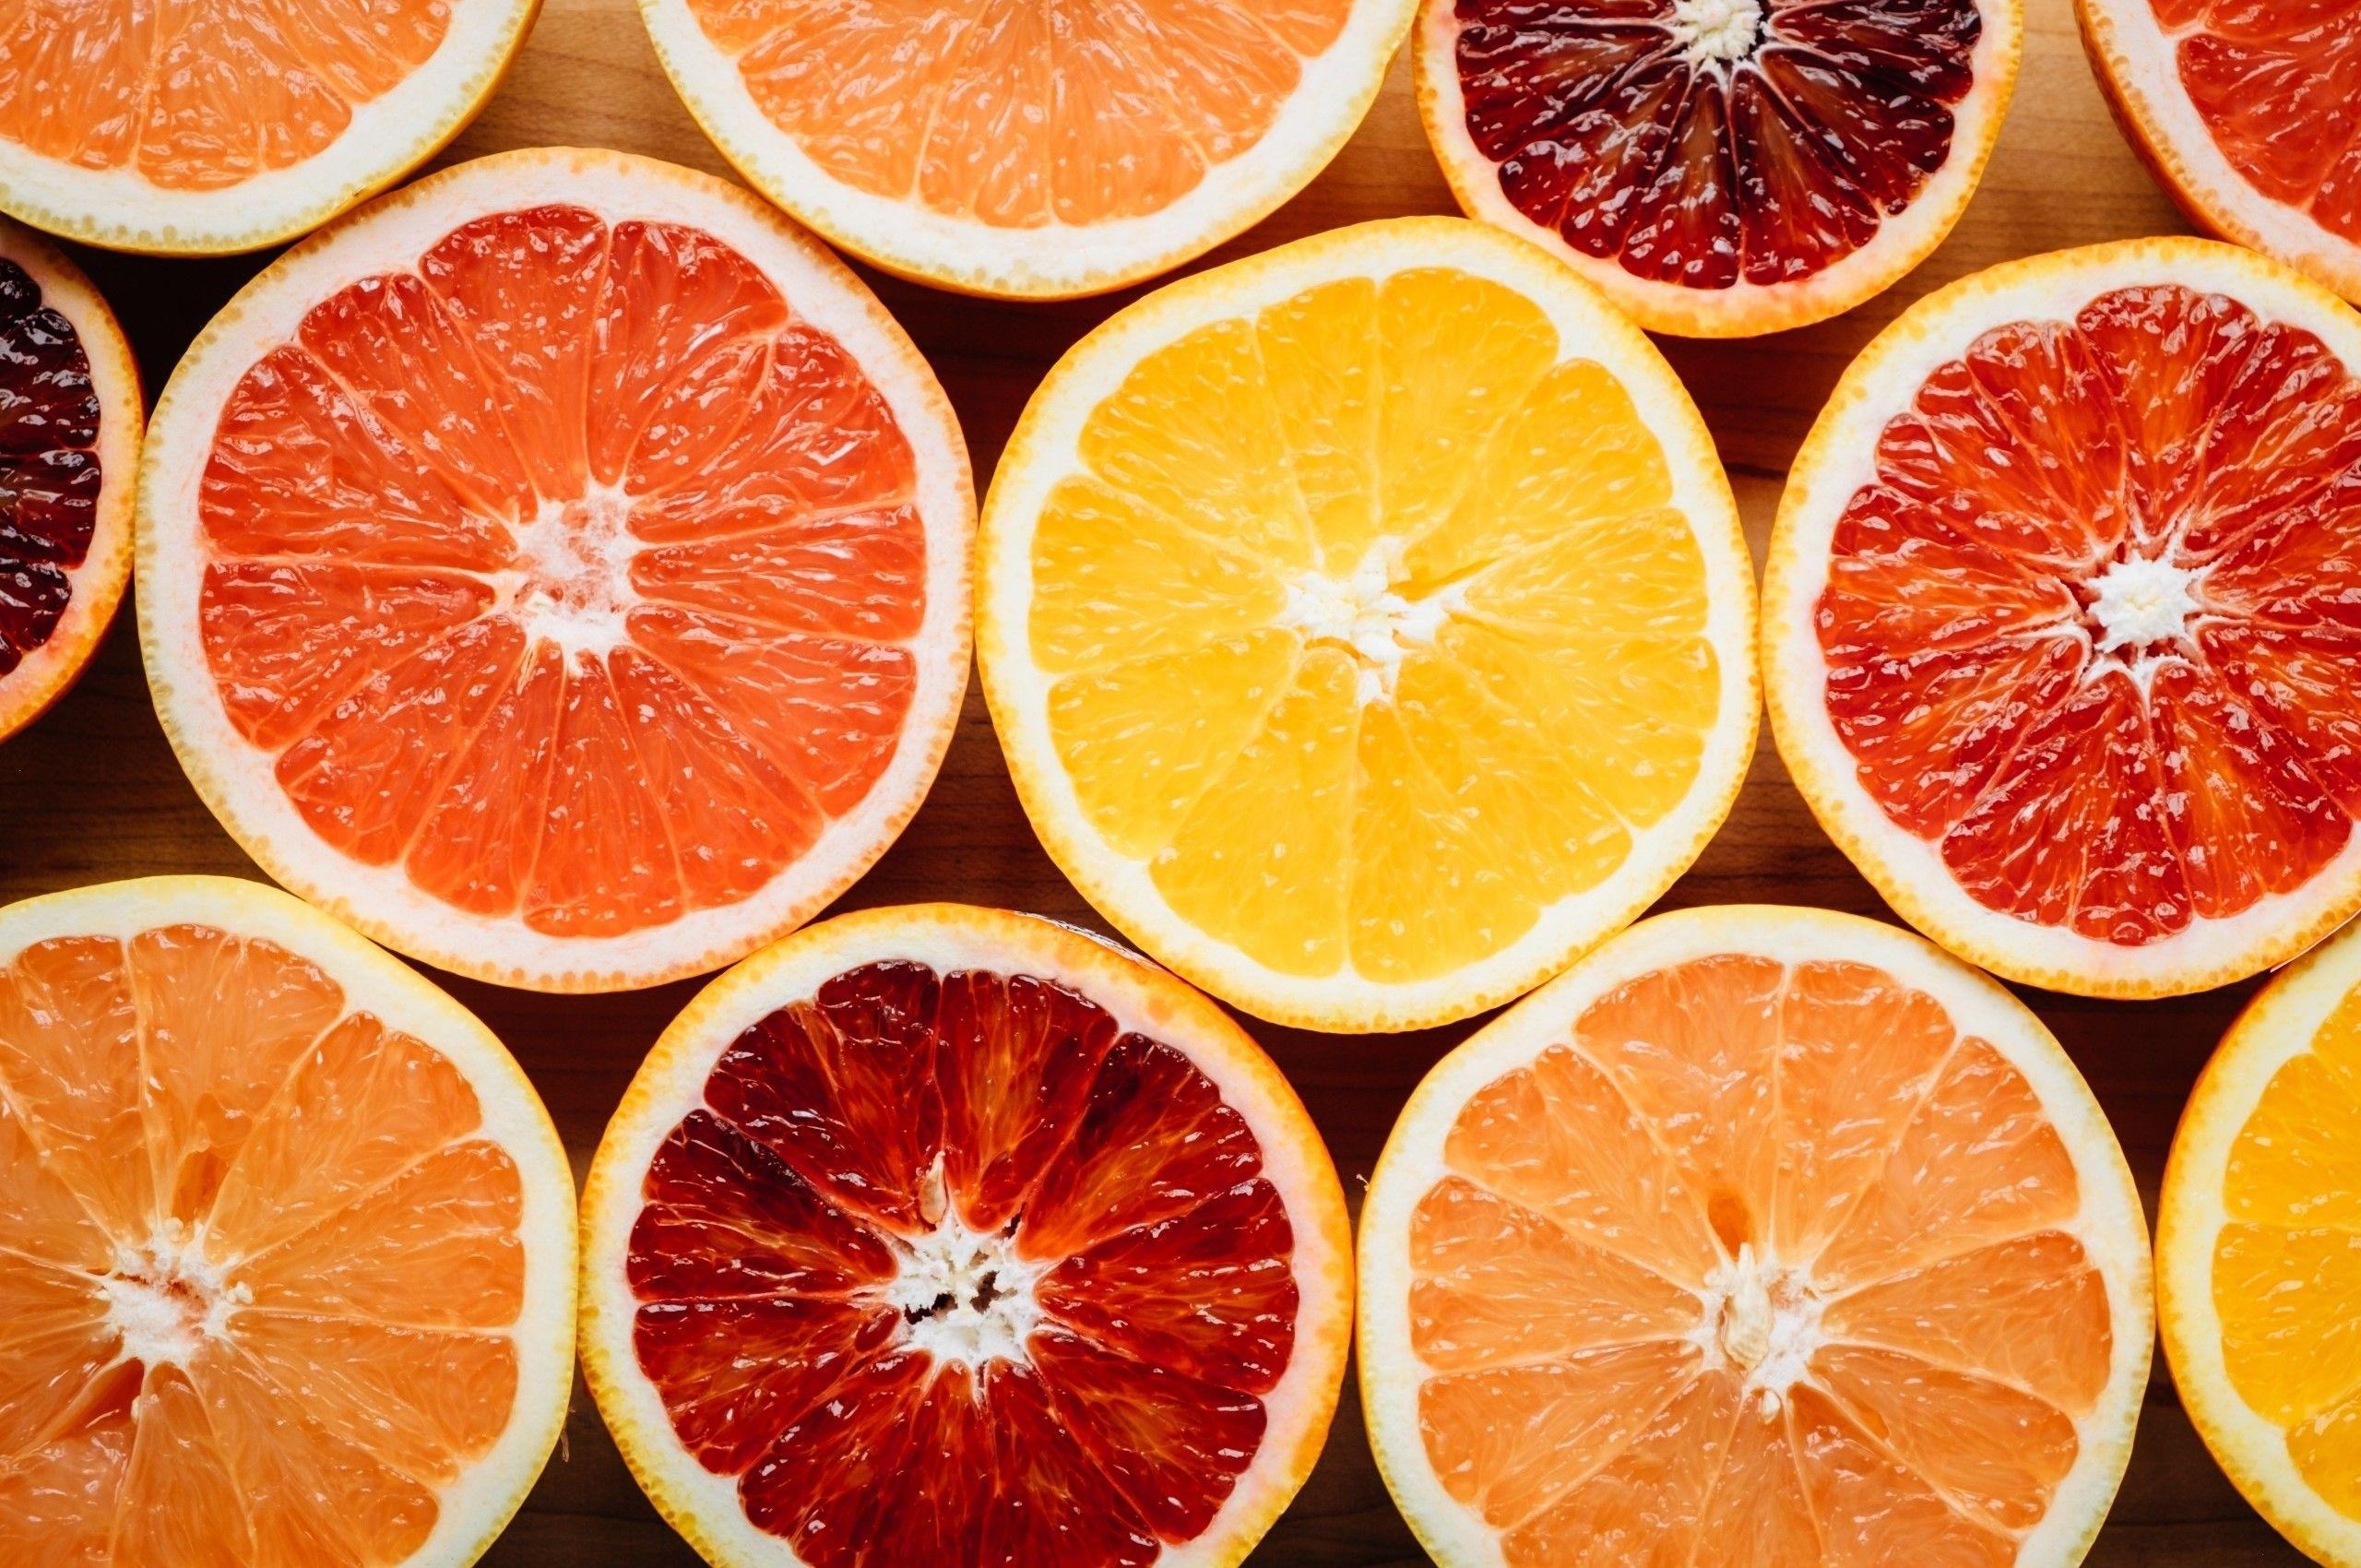 50 Citrus HD Wallpapers and Backgrounds